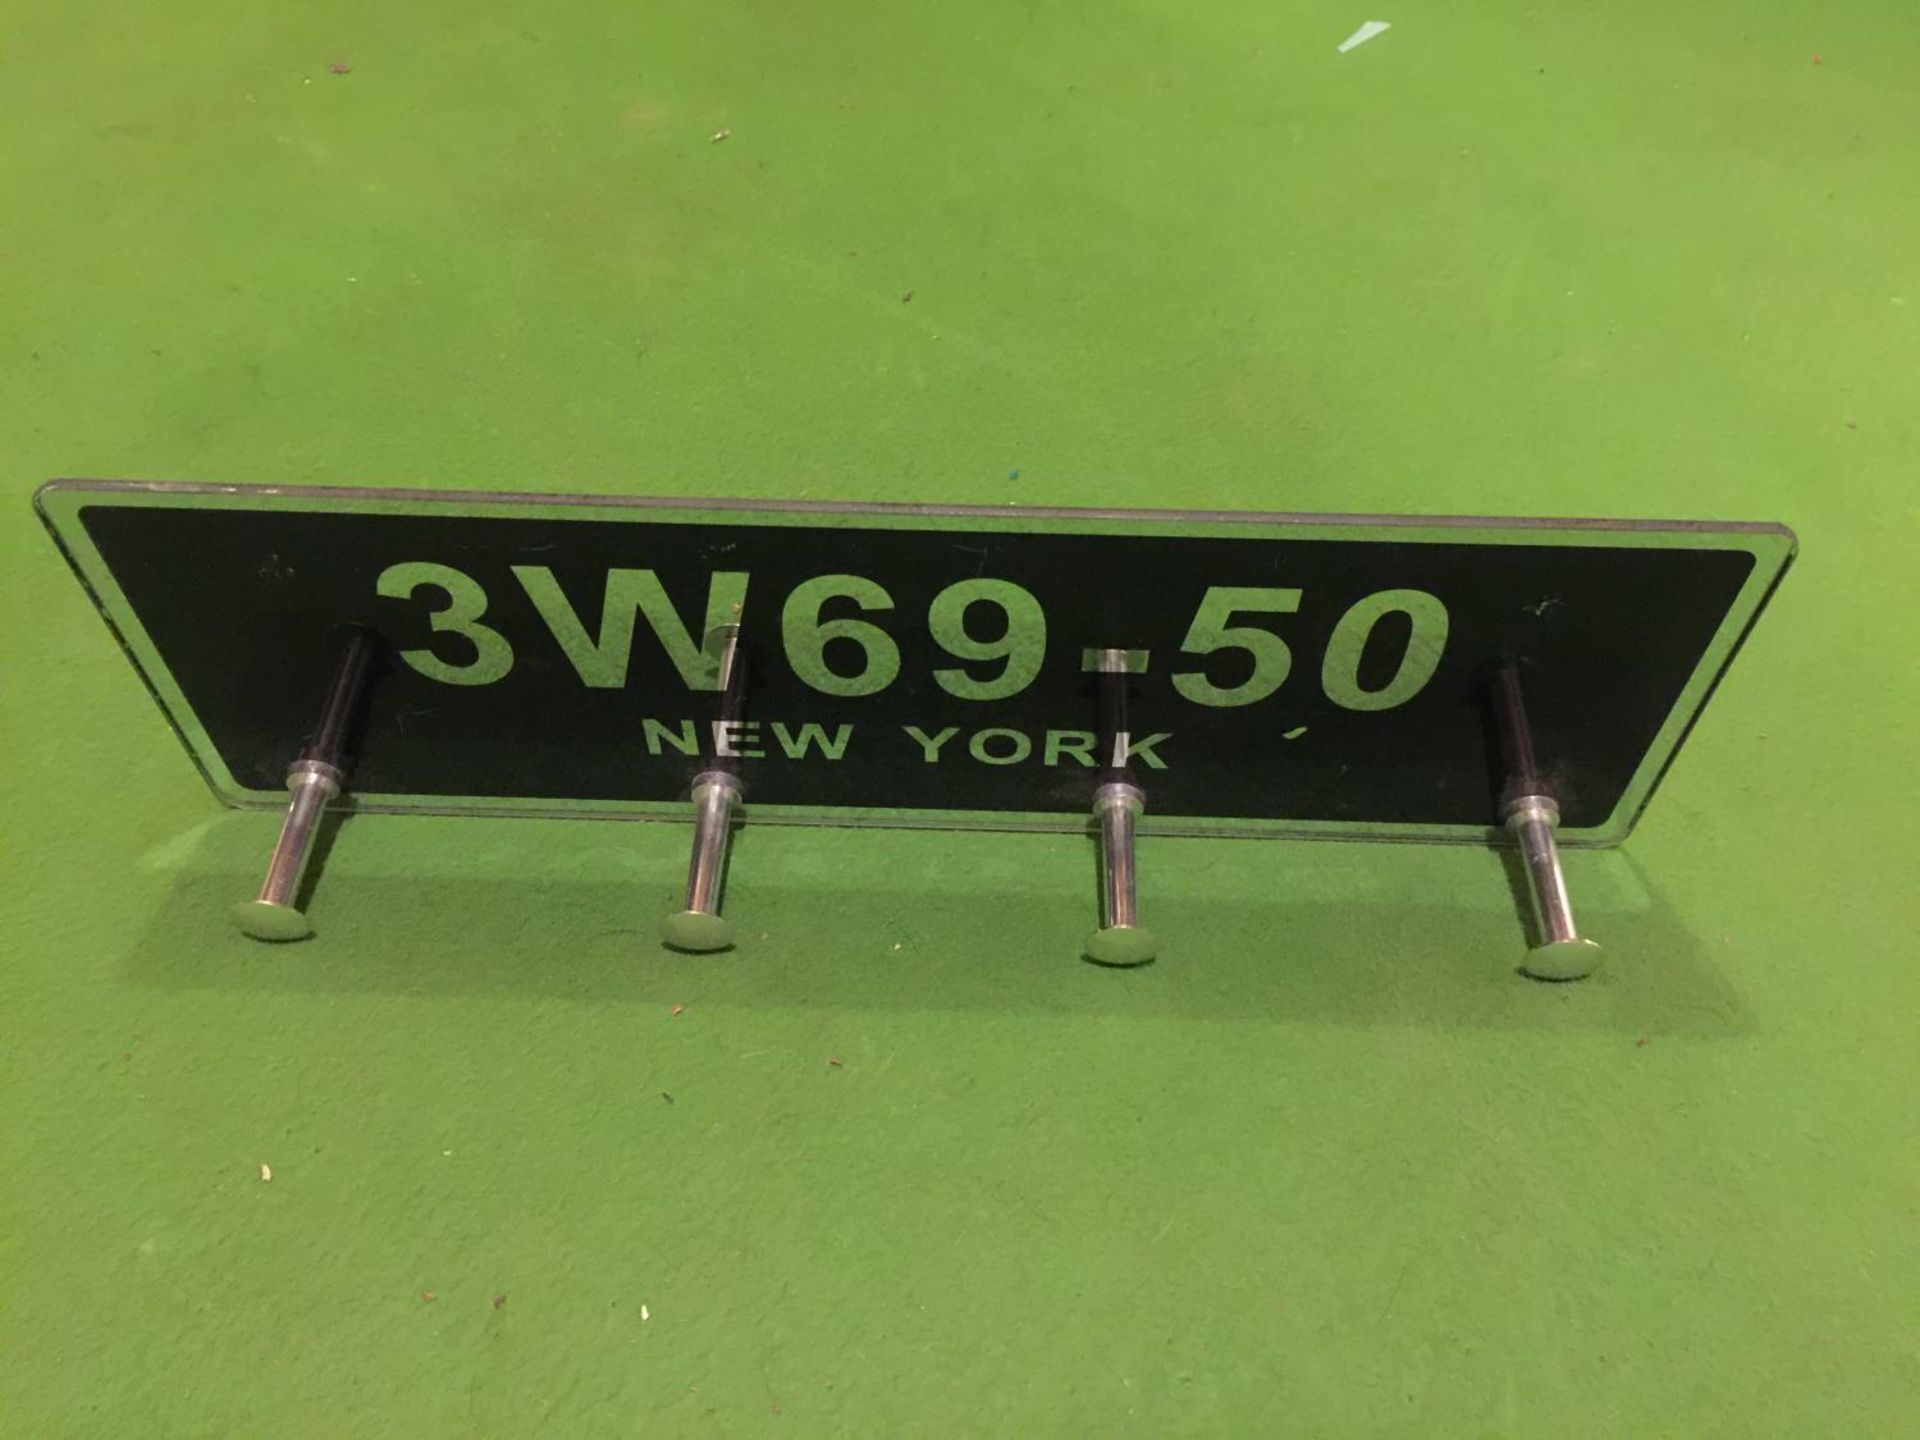 A MIRRORS GLASS NEW YORK NUMBER PLATE STYLE COAT HOOK - Image 2 of 2